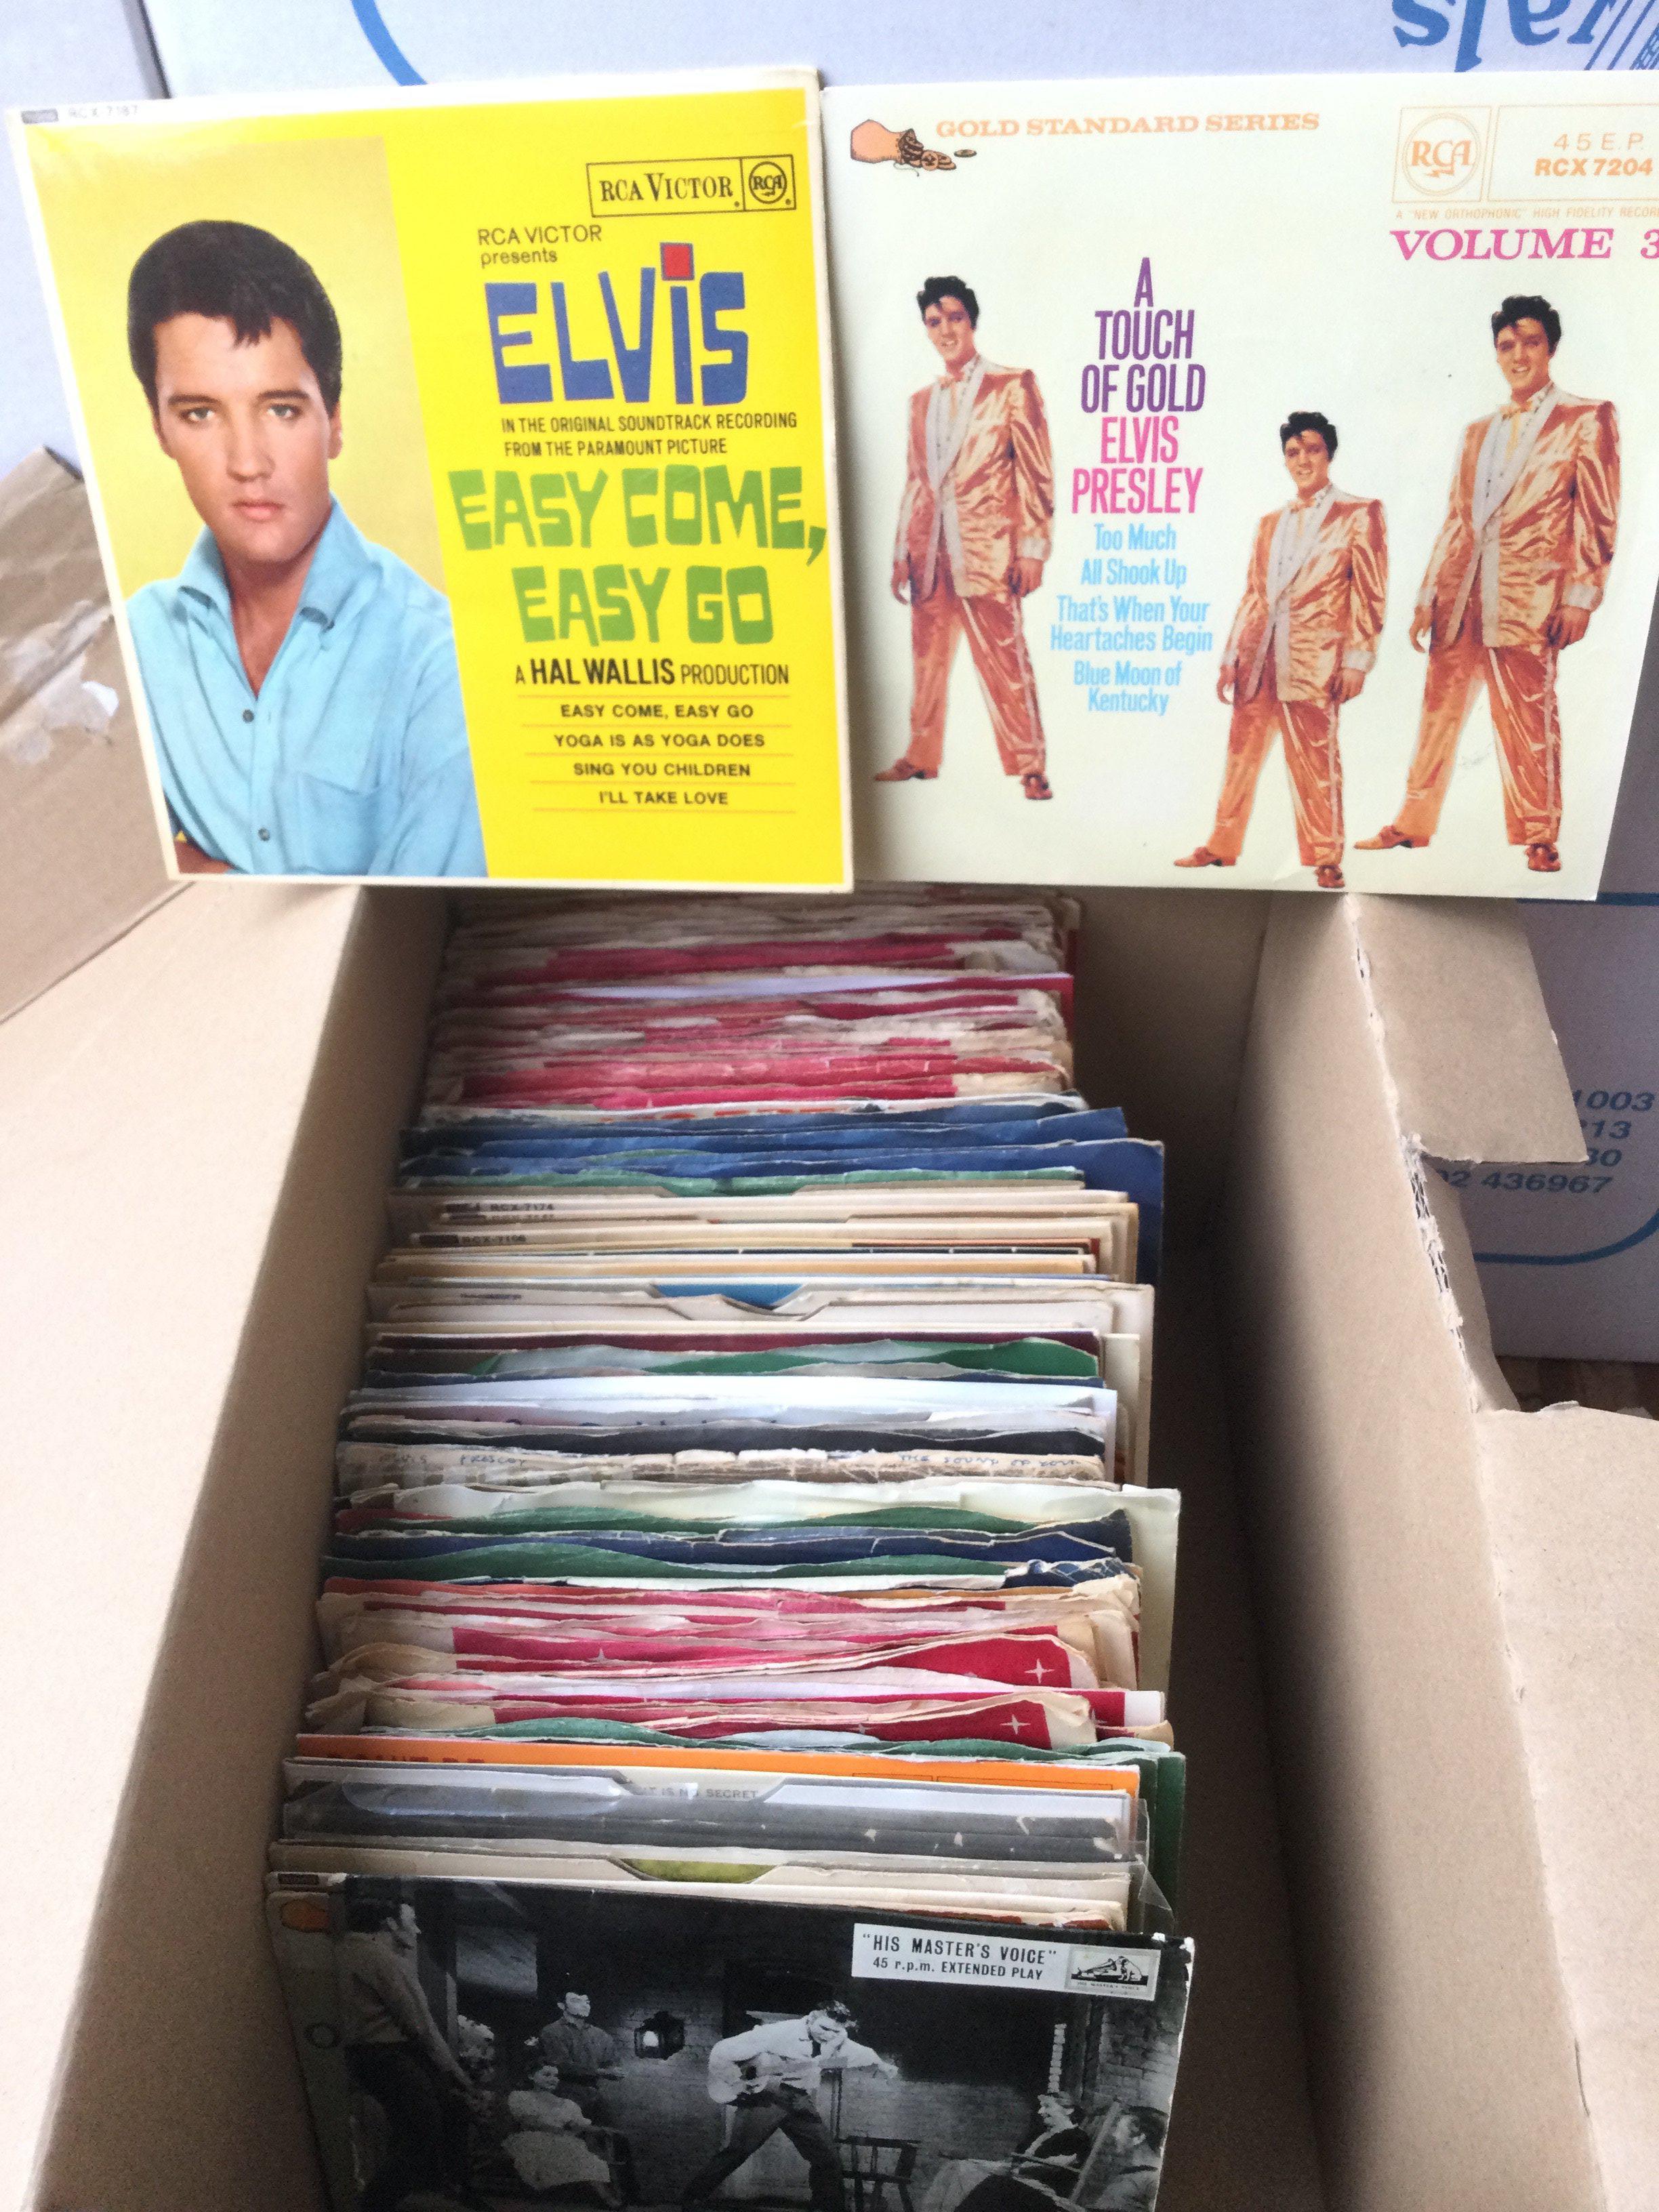 A collection of Elvis Presley 7inch singles and EP